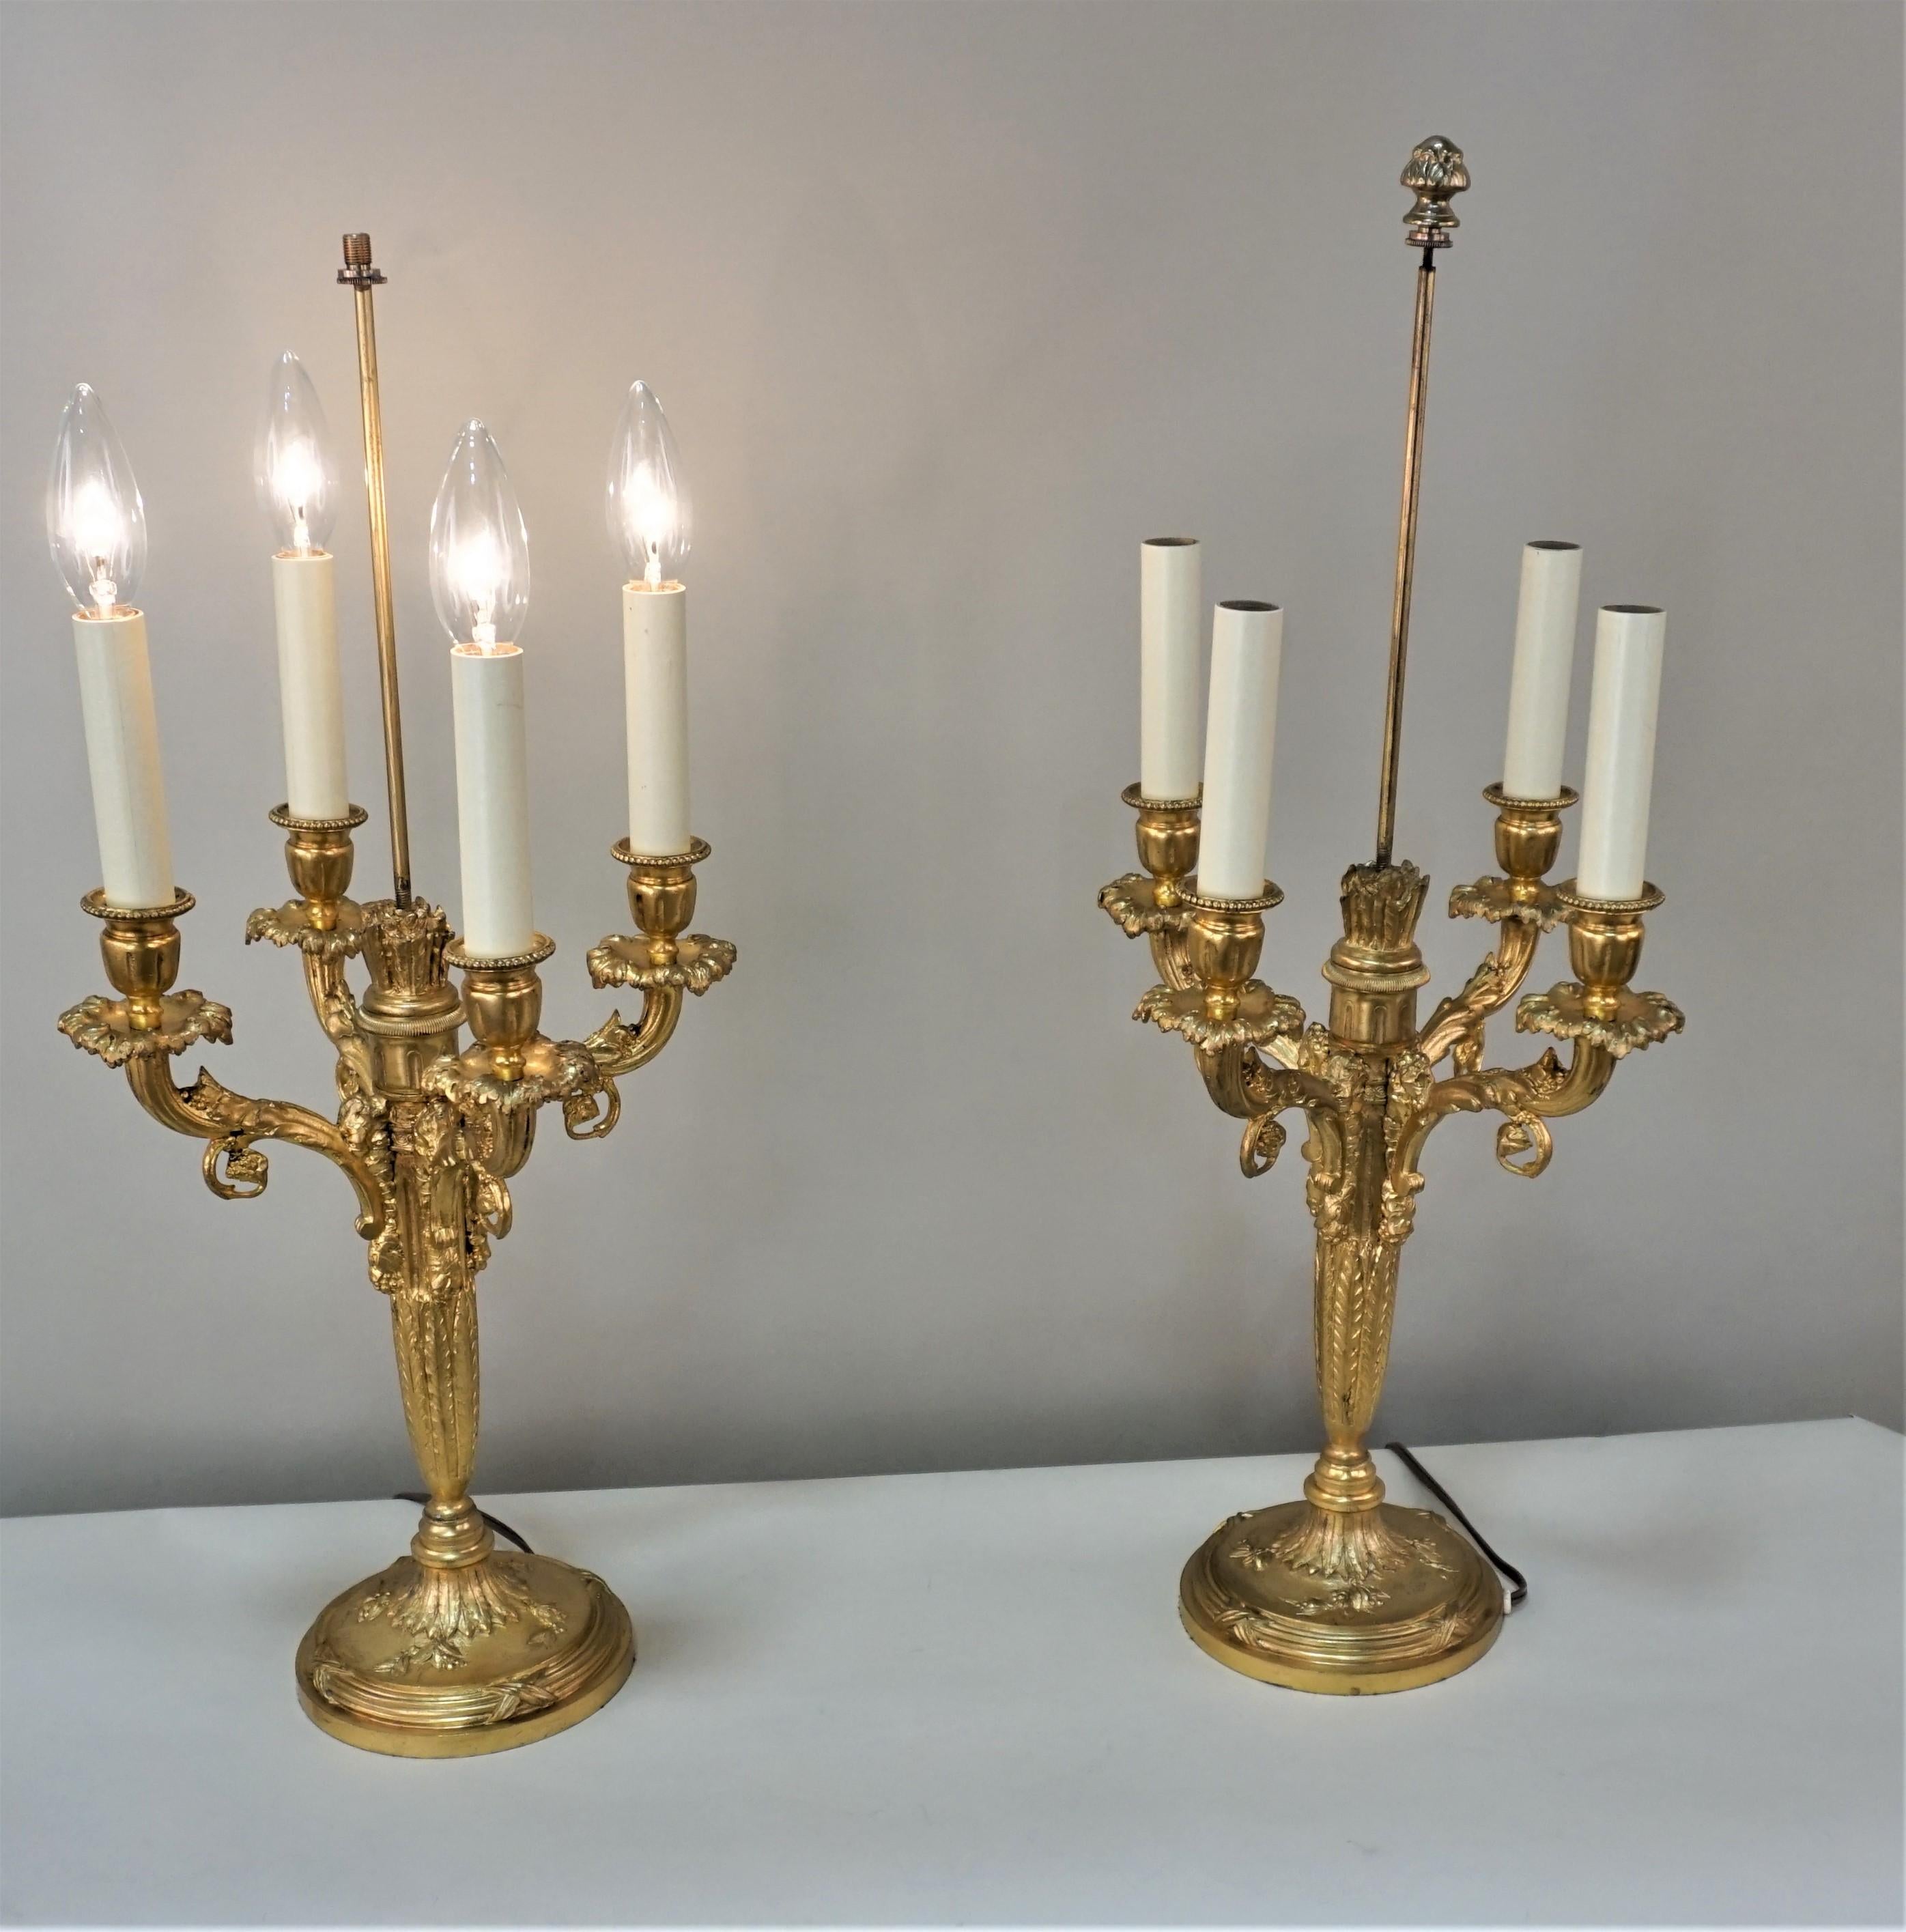 Early 20th Century Pair of Doré Bronze Candelabra Lamps by Albert Maroinnet